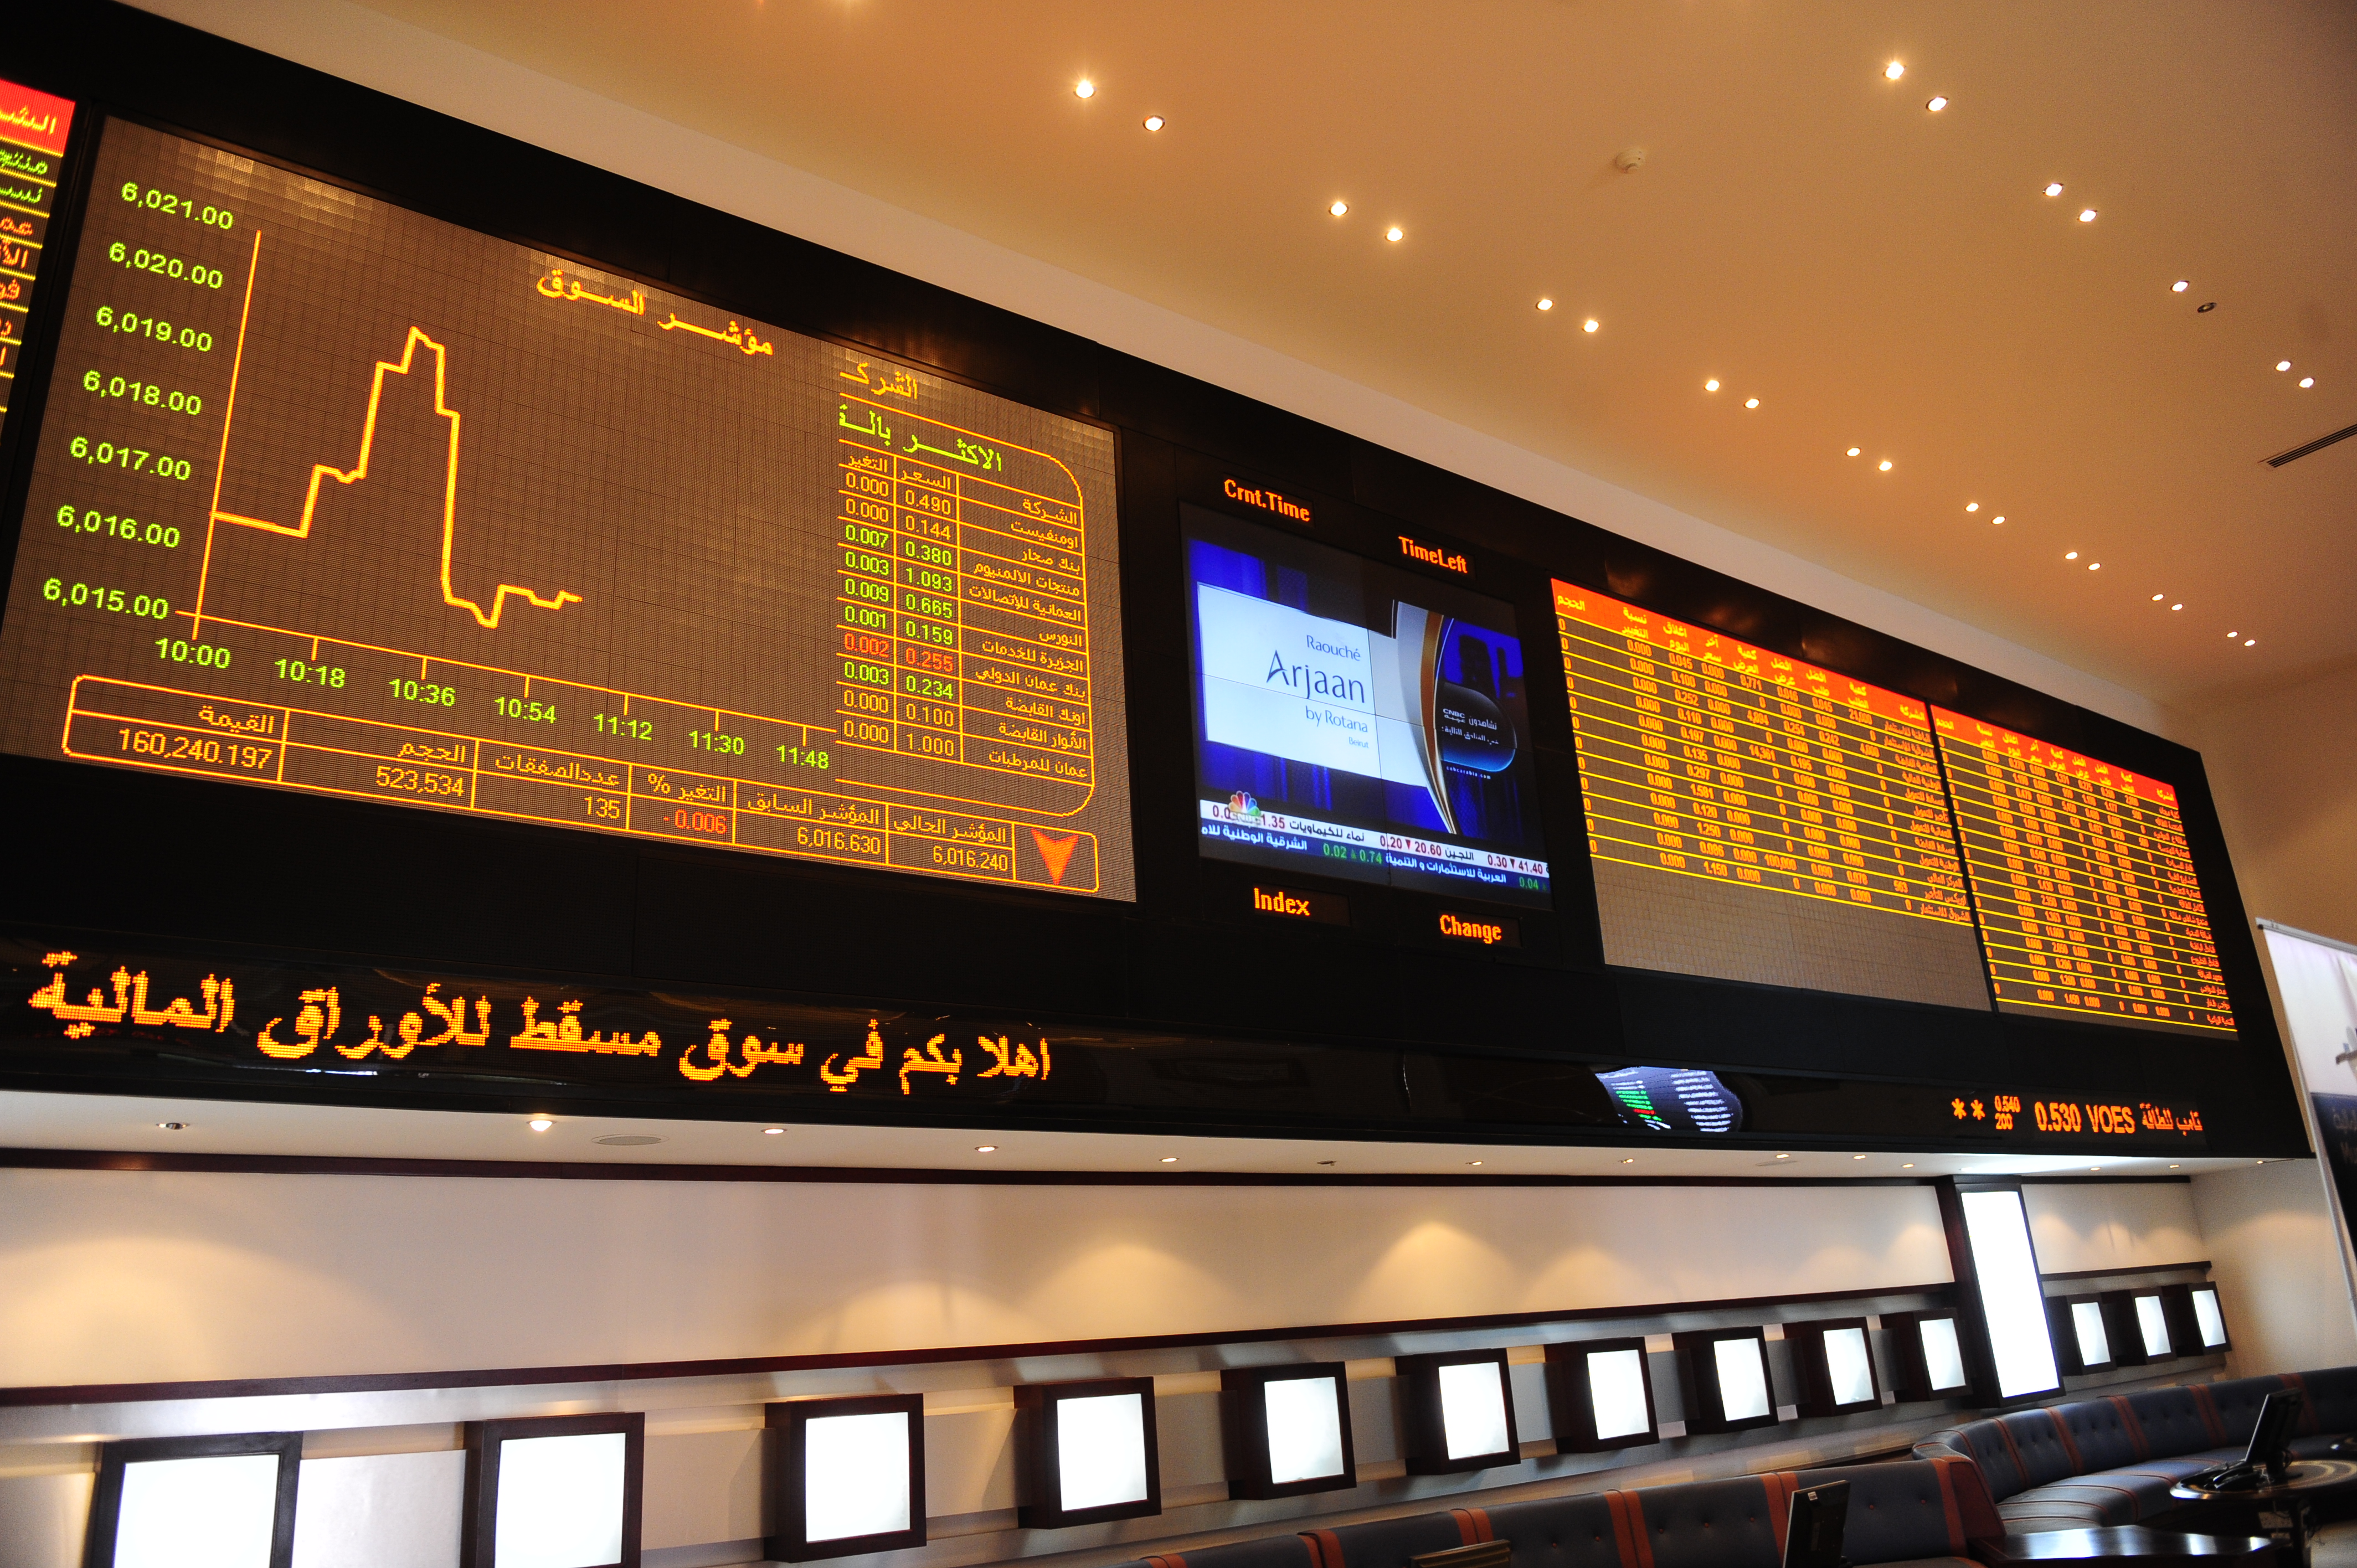 Muscat bourse falls on regional cues, weakness in oil prices